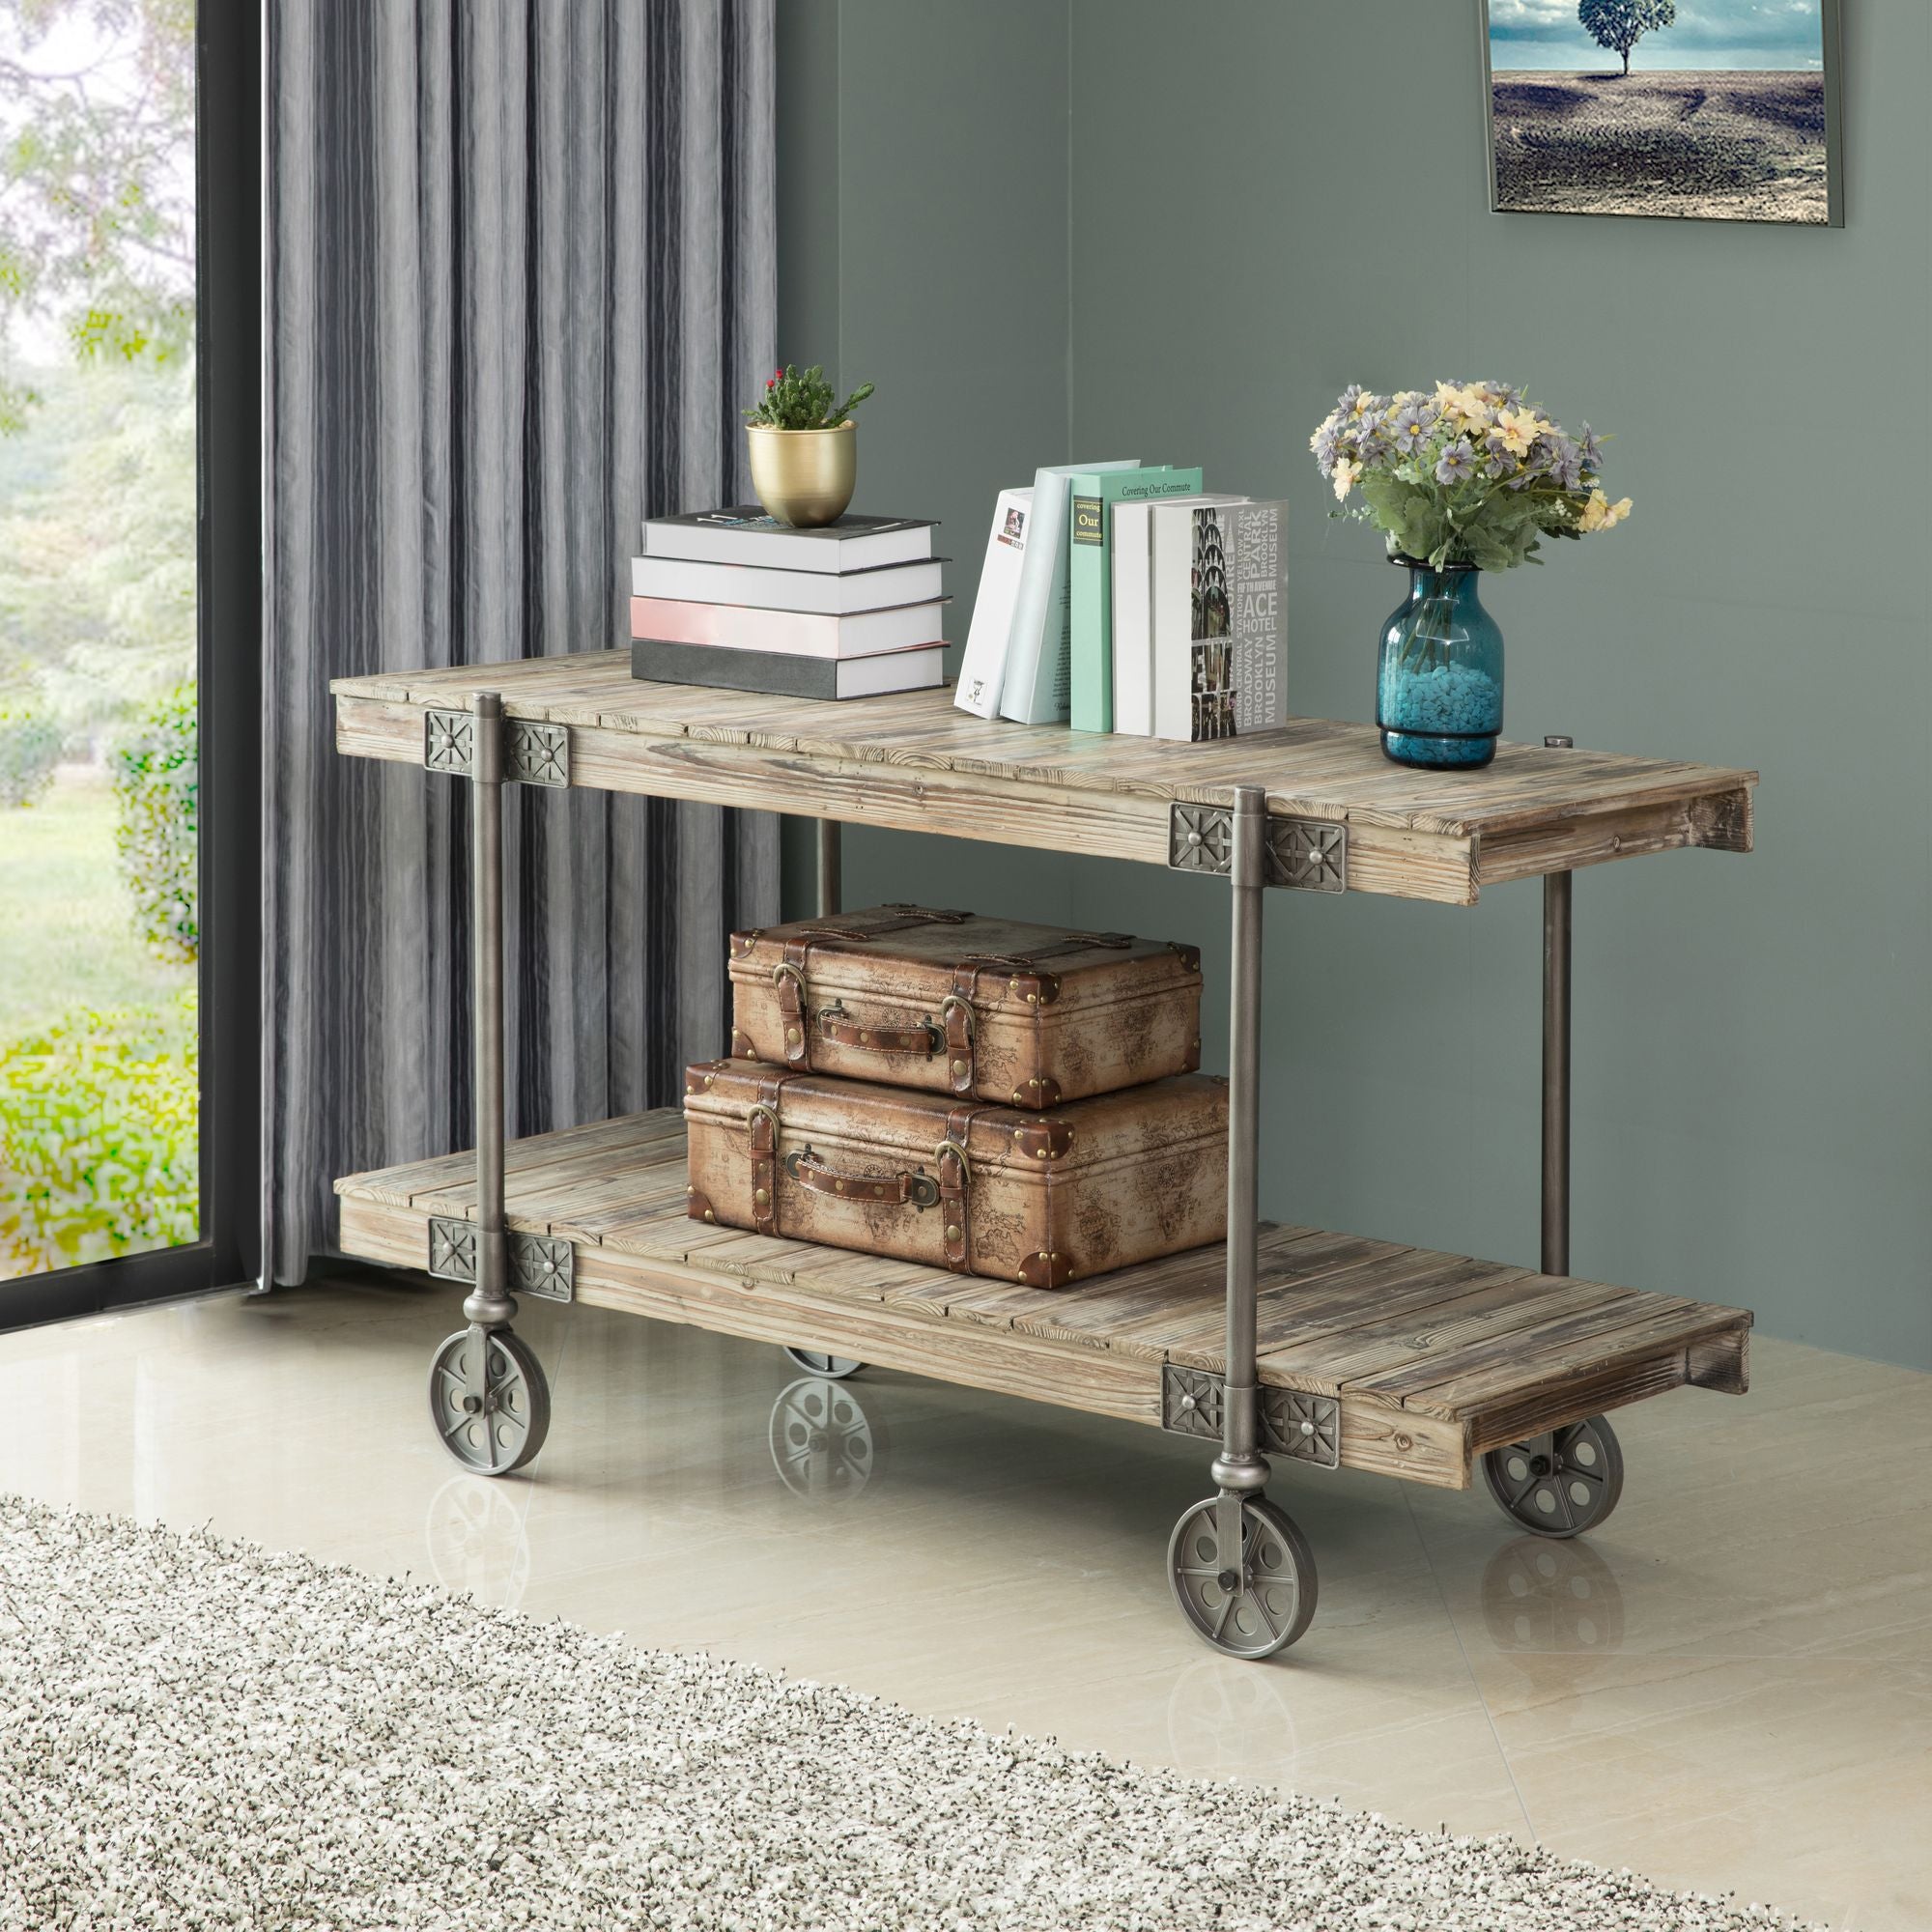 Factory cart console table with books and plants